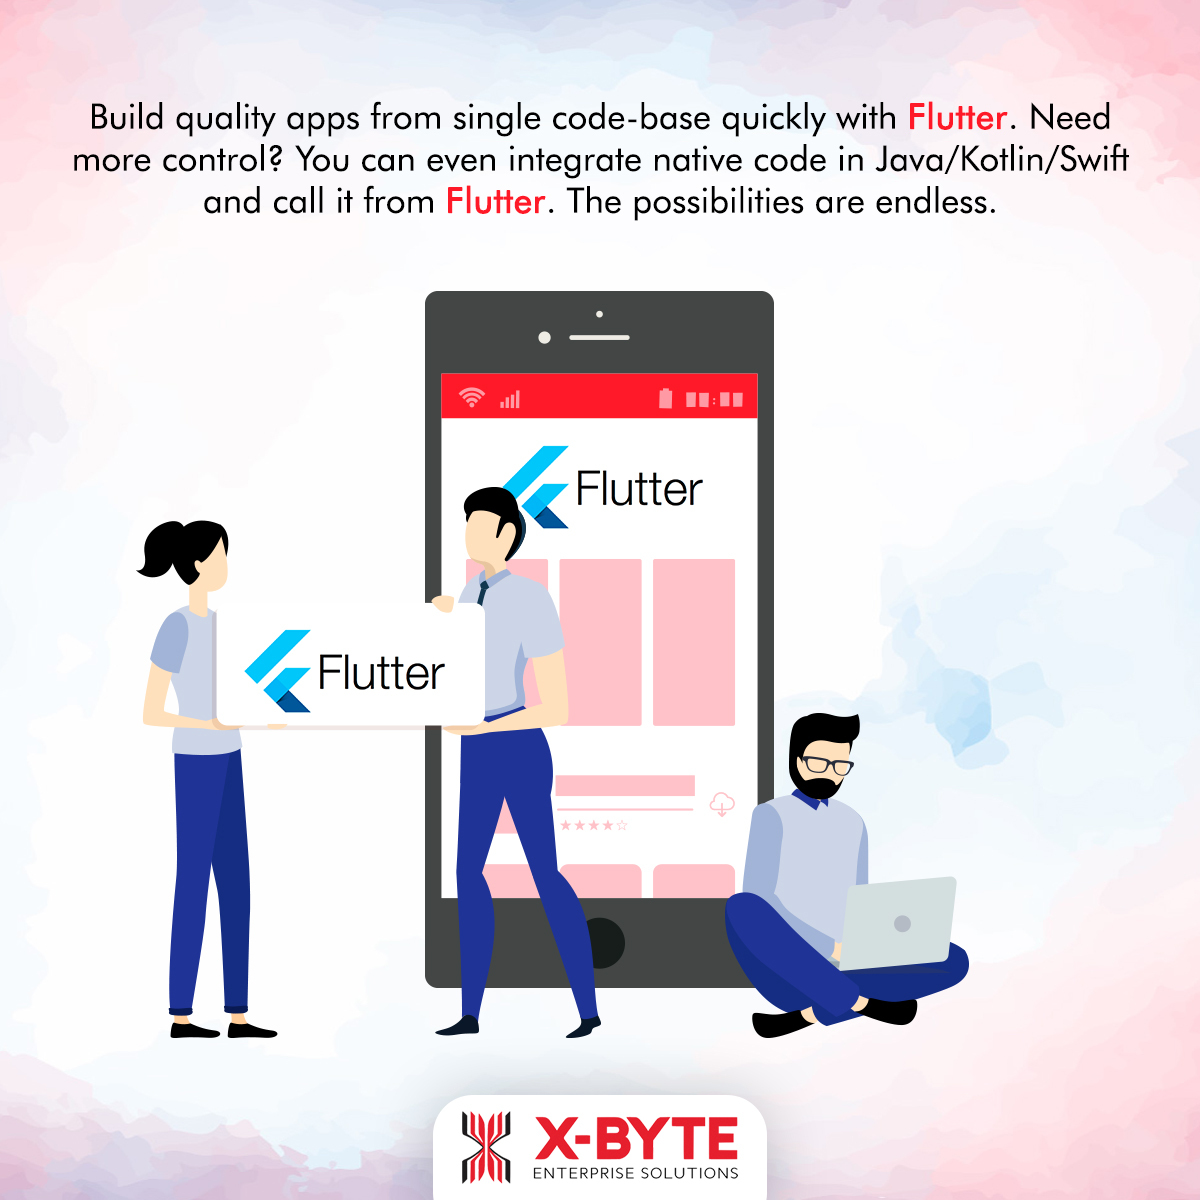 Build quality apps from single code-base quickly with Flutter. Need
more control? You can even integrate native code in Java/Kotlin/Swift
and call it from Flutter. The possibilities are endless.

 

~< Flutter
nN

t

% Flutter J c

ih X:BYTE

ENTERPRIS